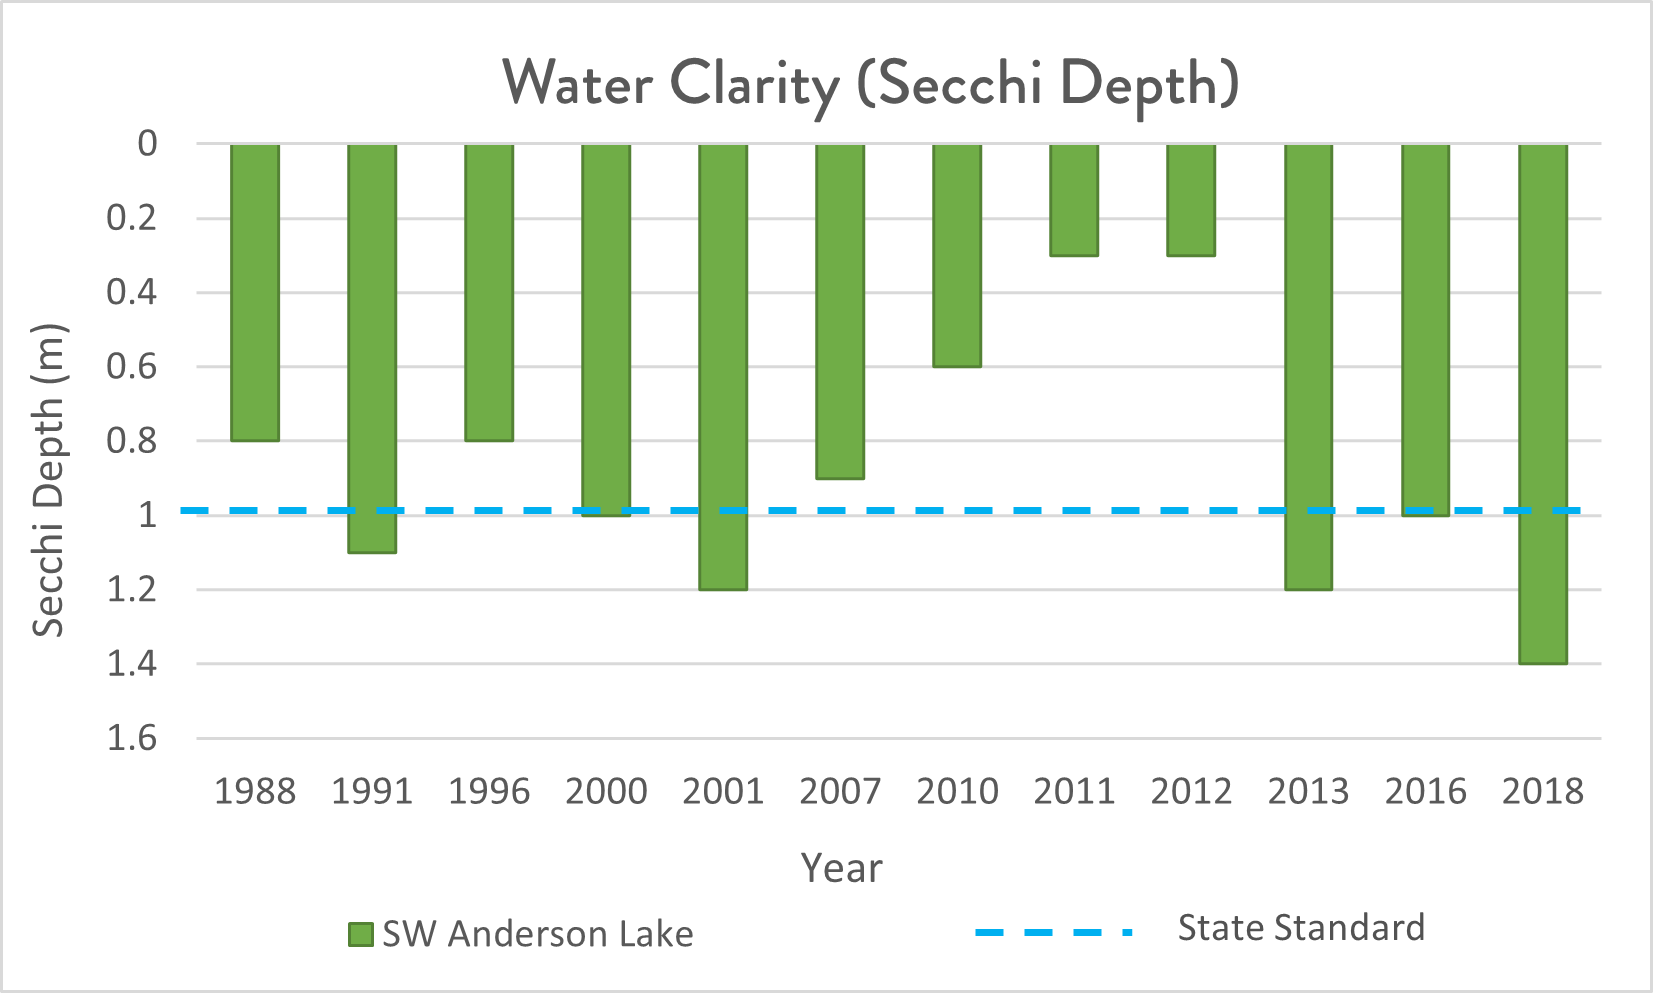 Graph of Water Clarity in SW Anderson lake from 1988 to 2018 using a secchi disk